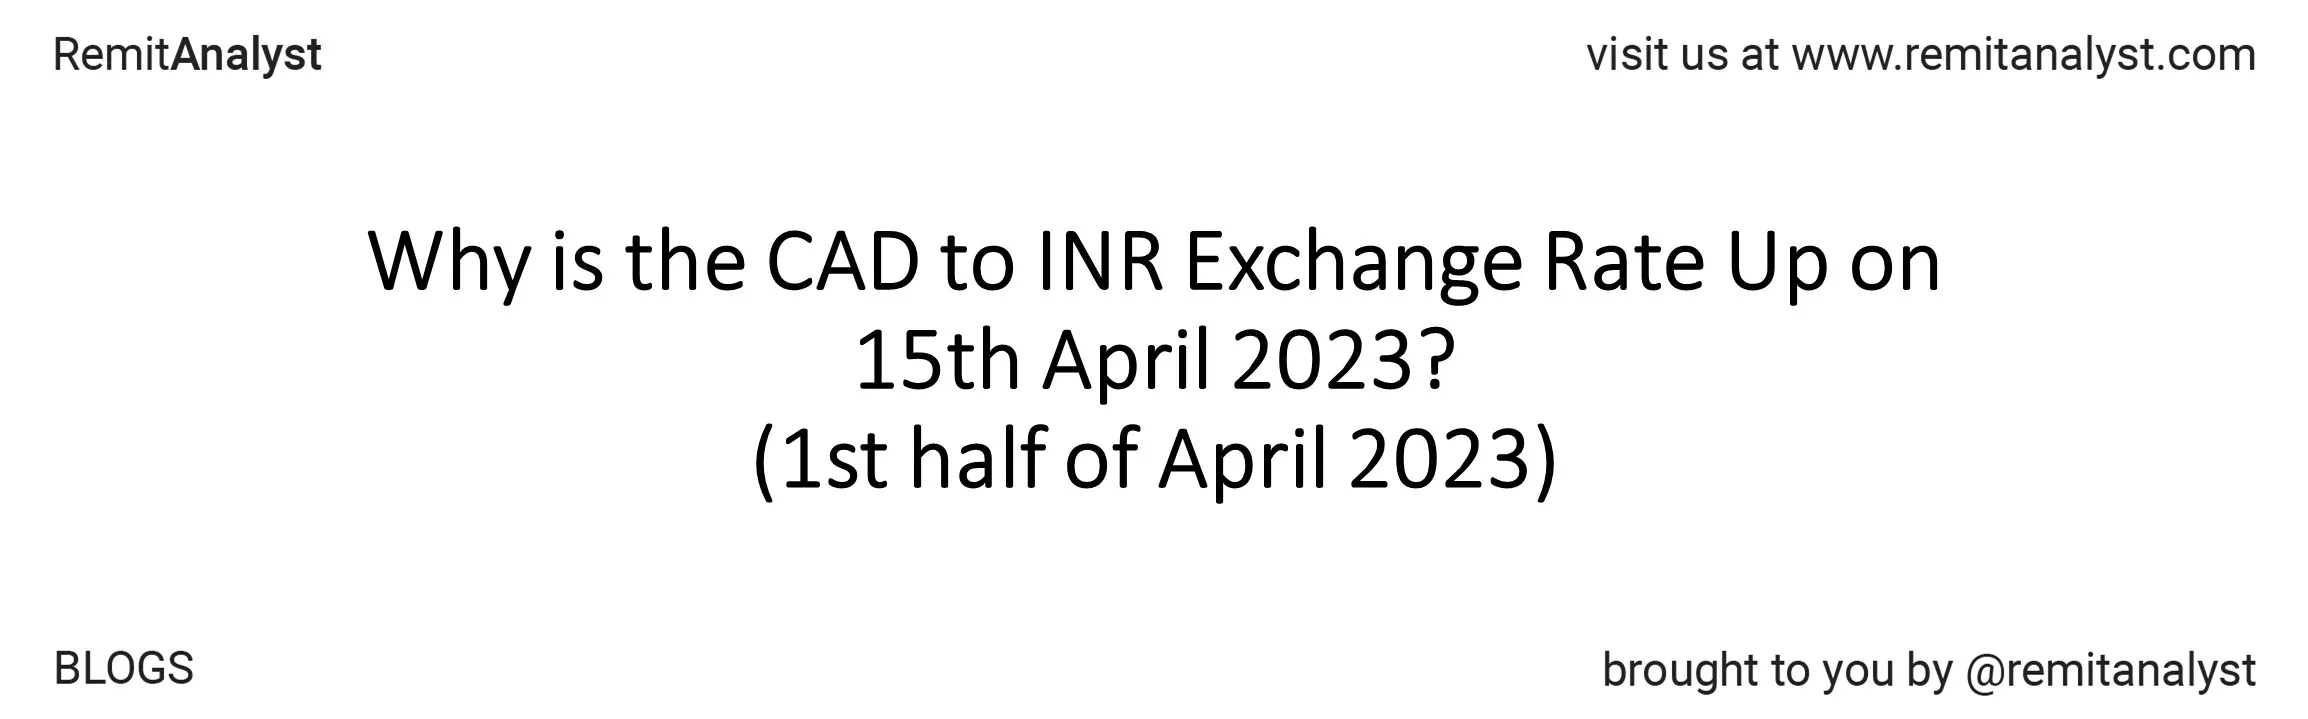 cad-to-inr-exchange-rate-from-3-apr-2023-to-15-apr-2023-title